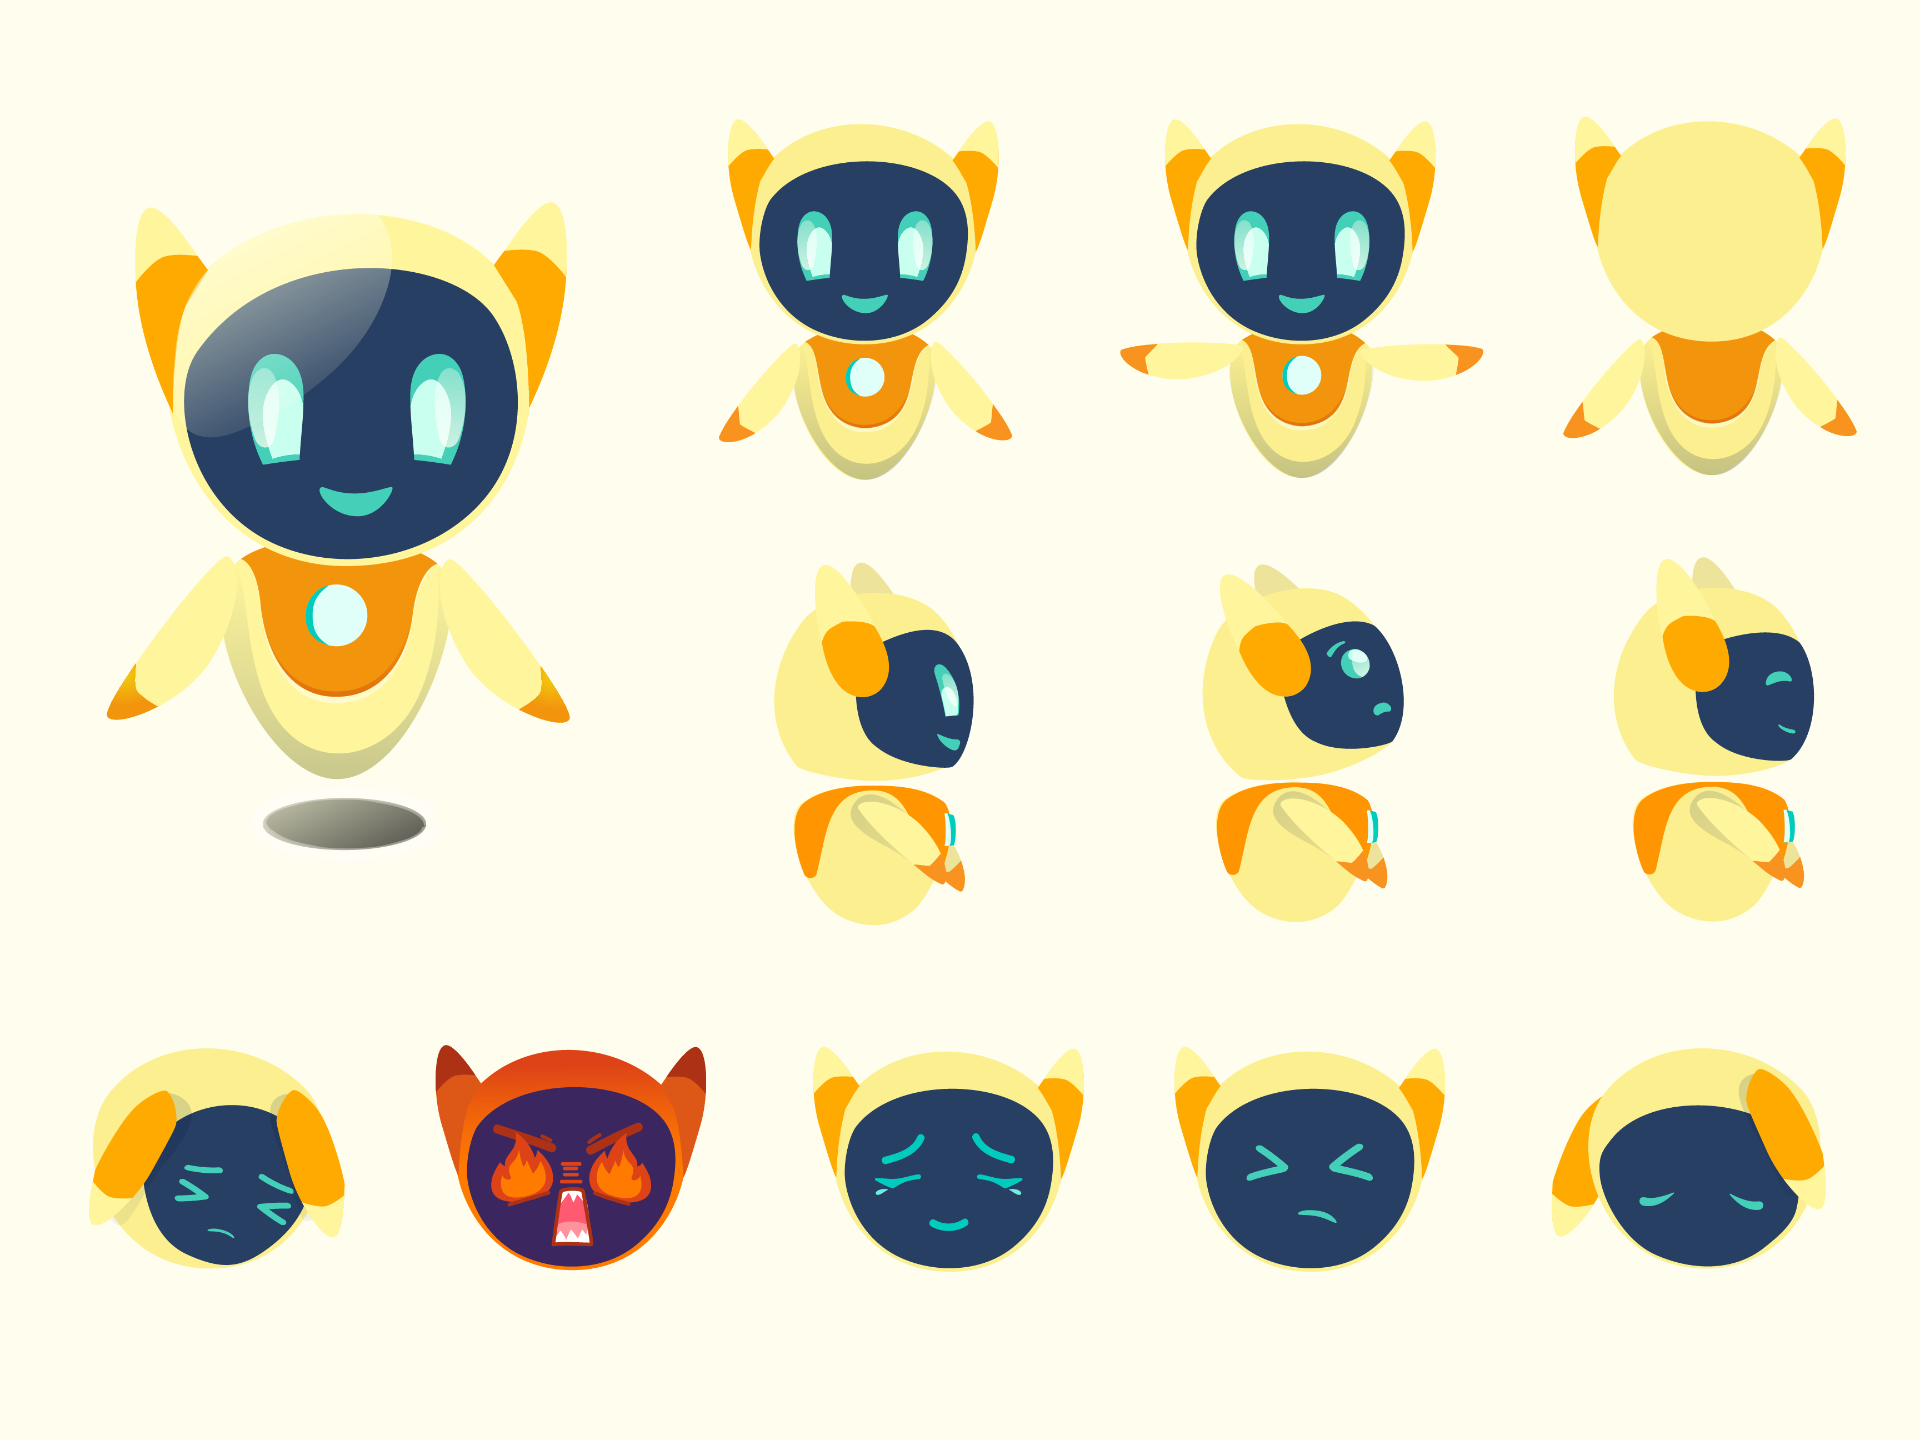 A design sheet for an orange robot with various poses and emotions